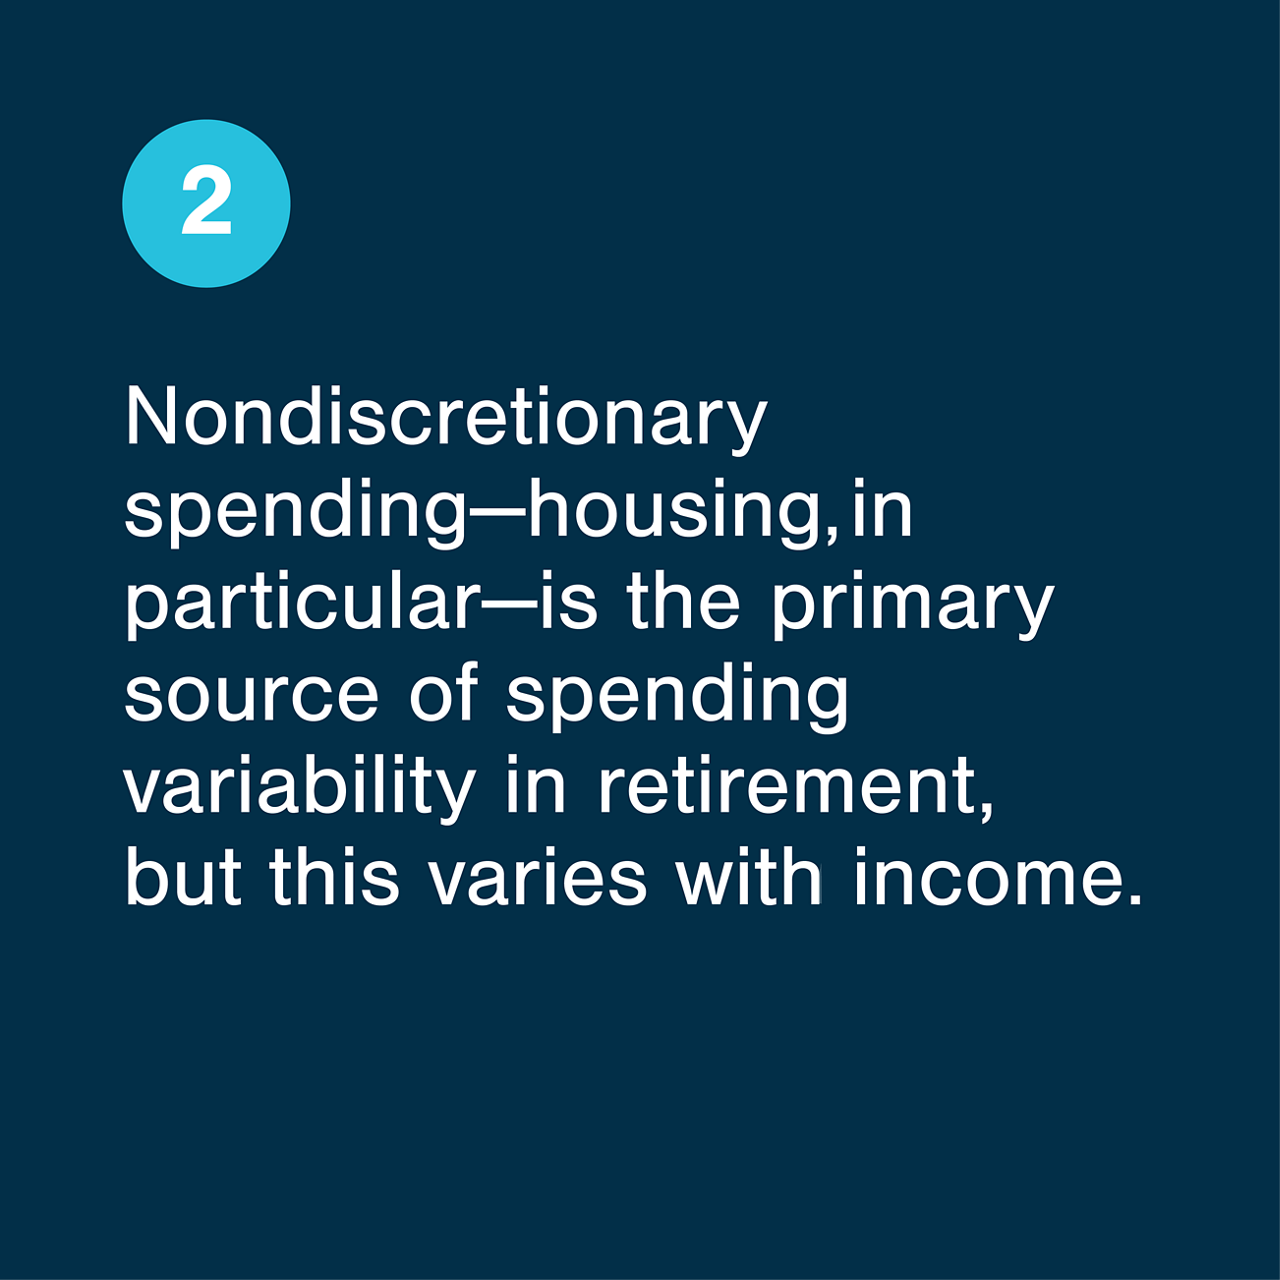 Nondiscretionary spending-housing in particular-is the primary source of spending variability in retirement, but this varies with income.